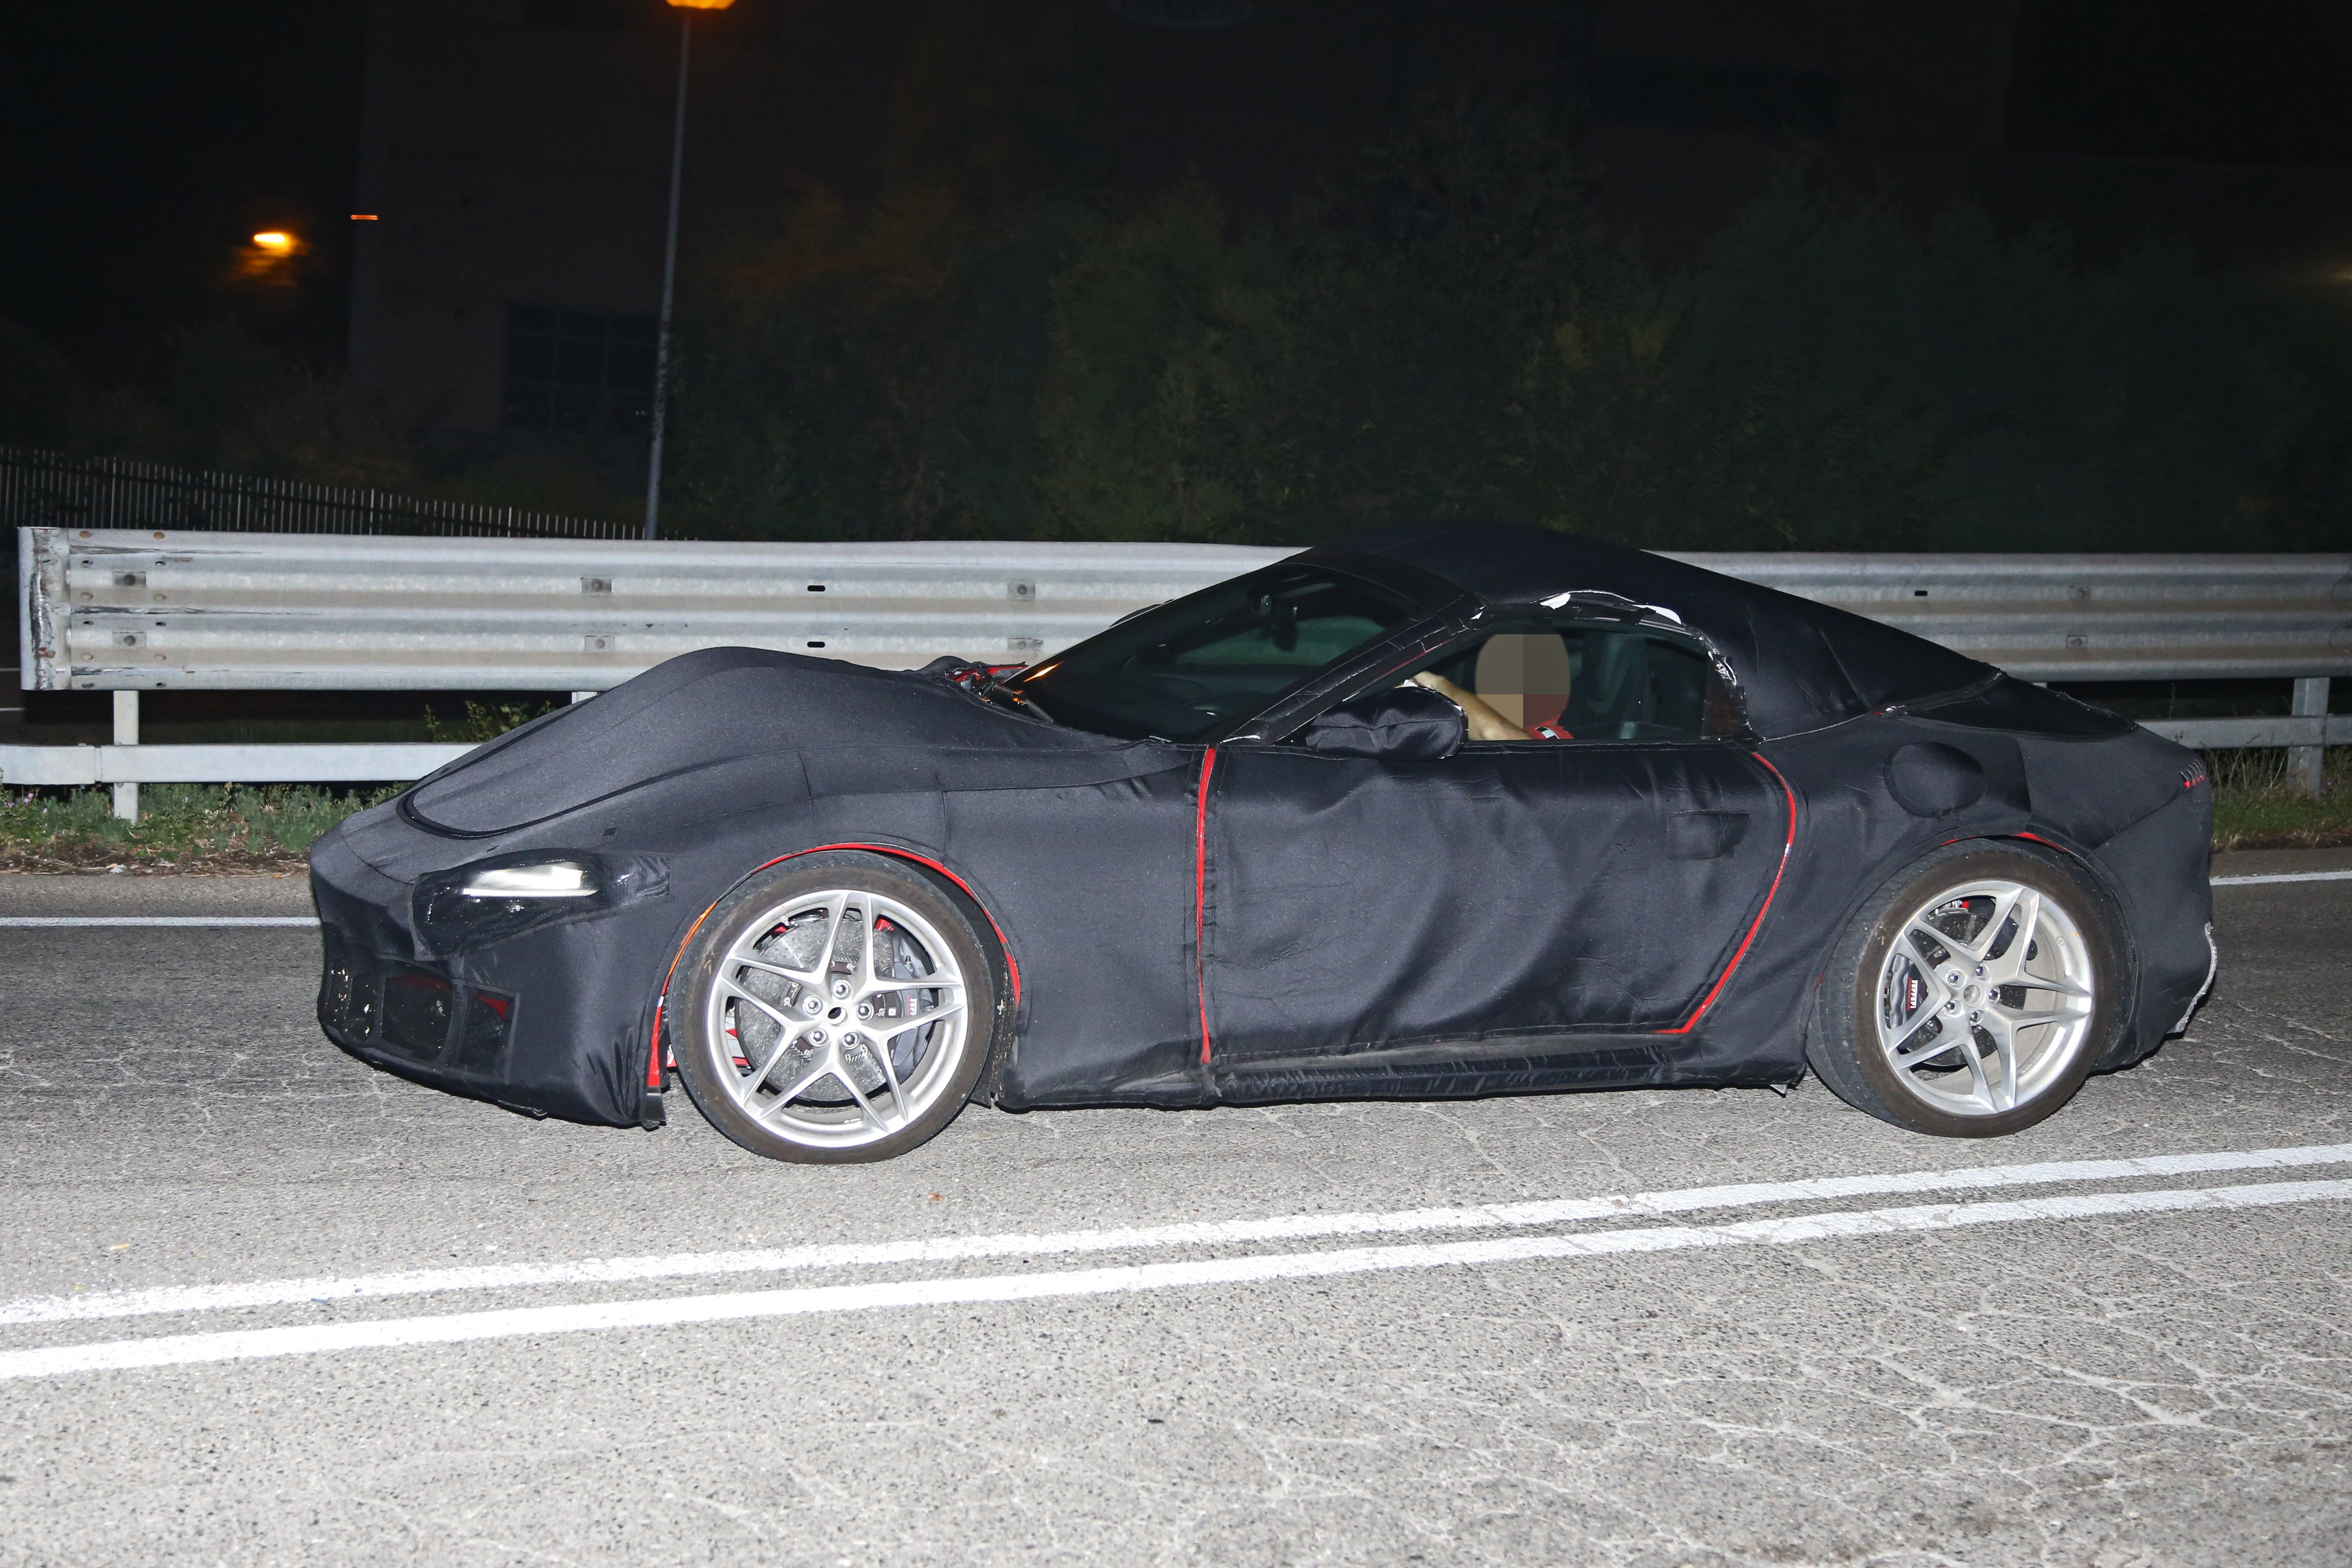 Spy Shots An Early Look At The Ferrari Roma Spider